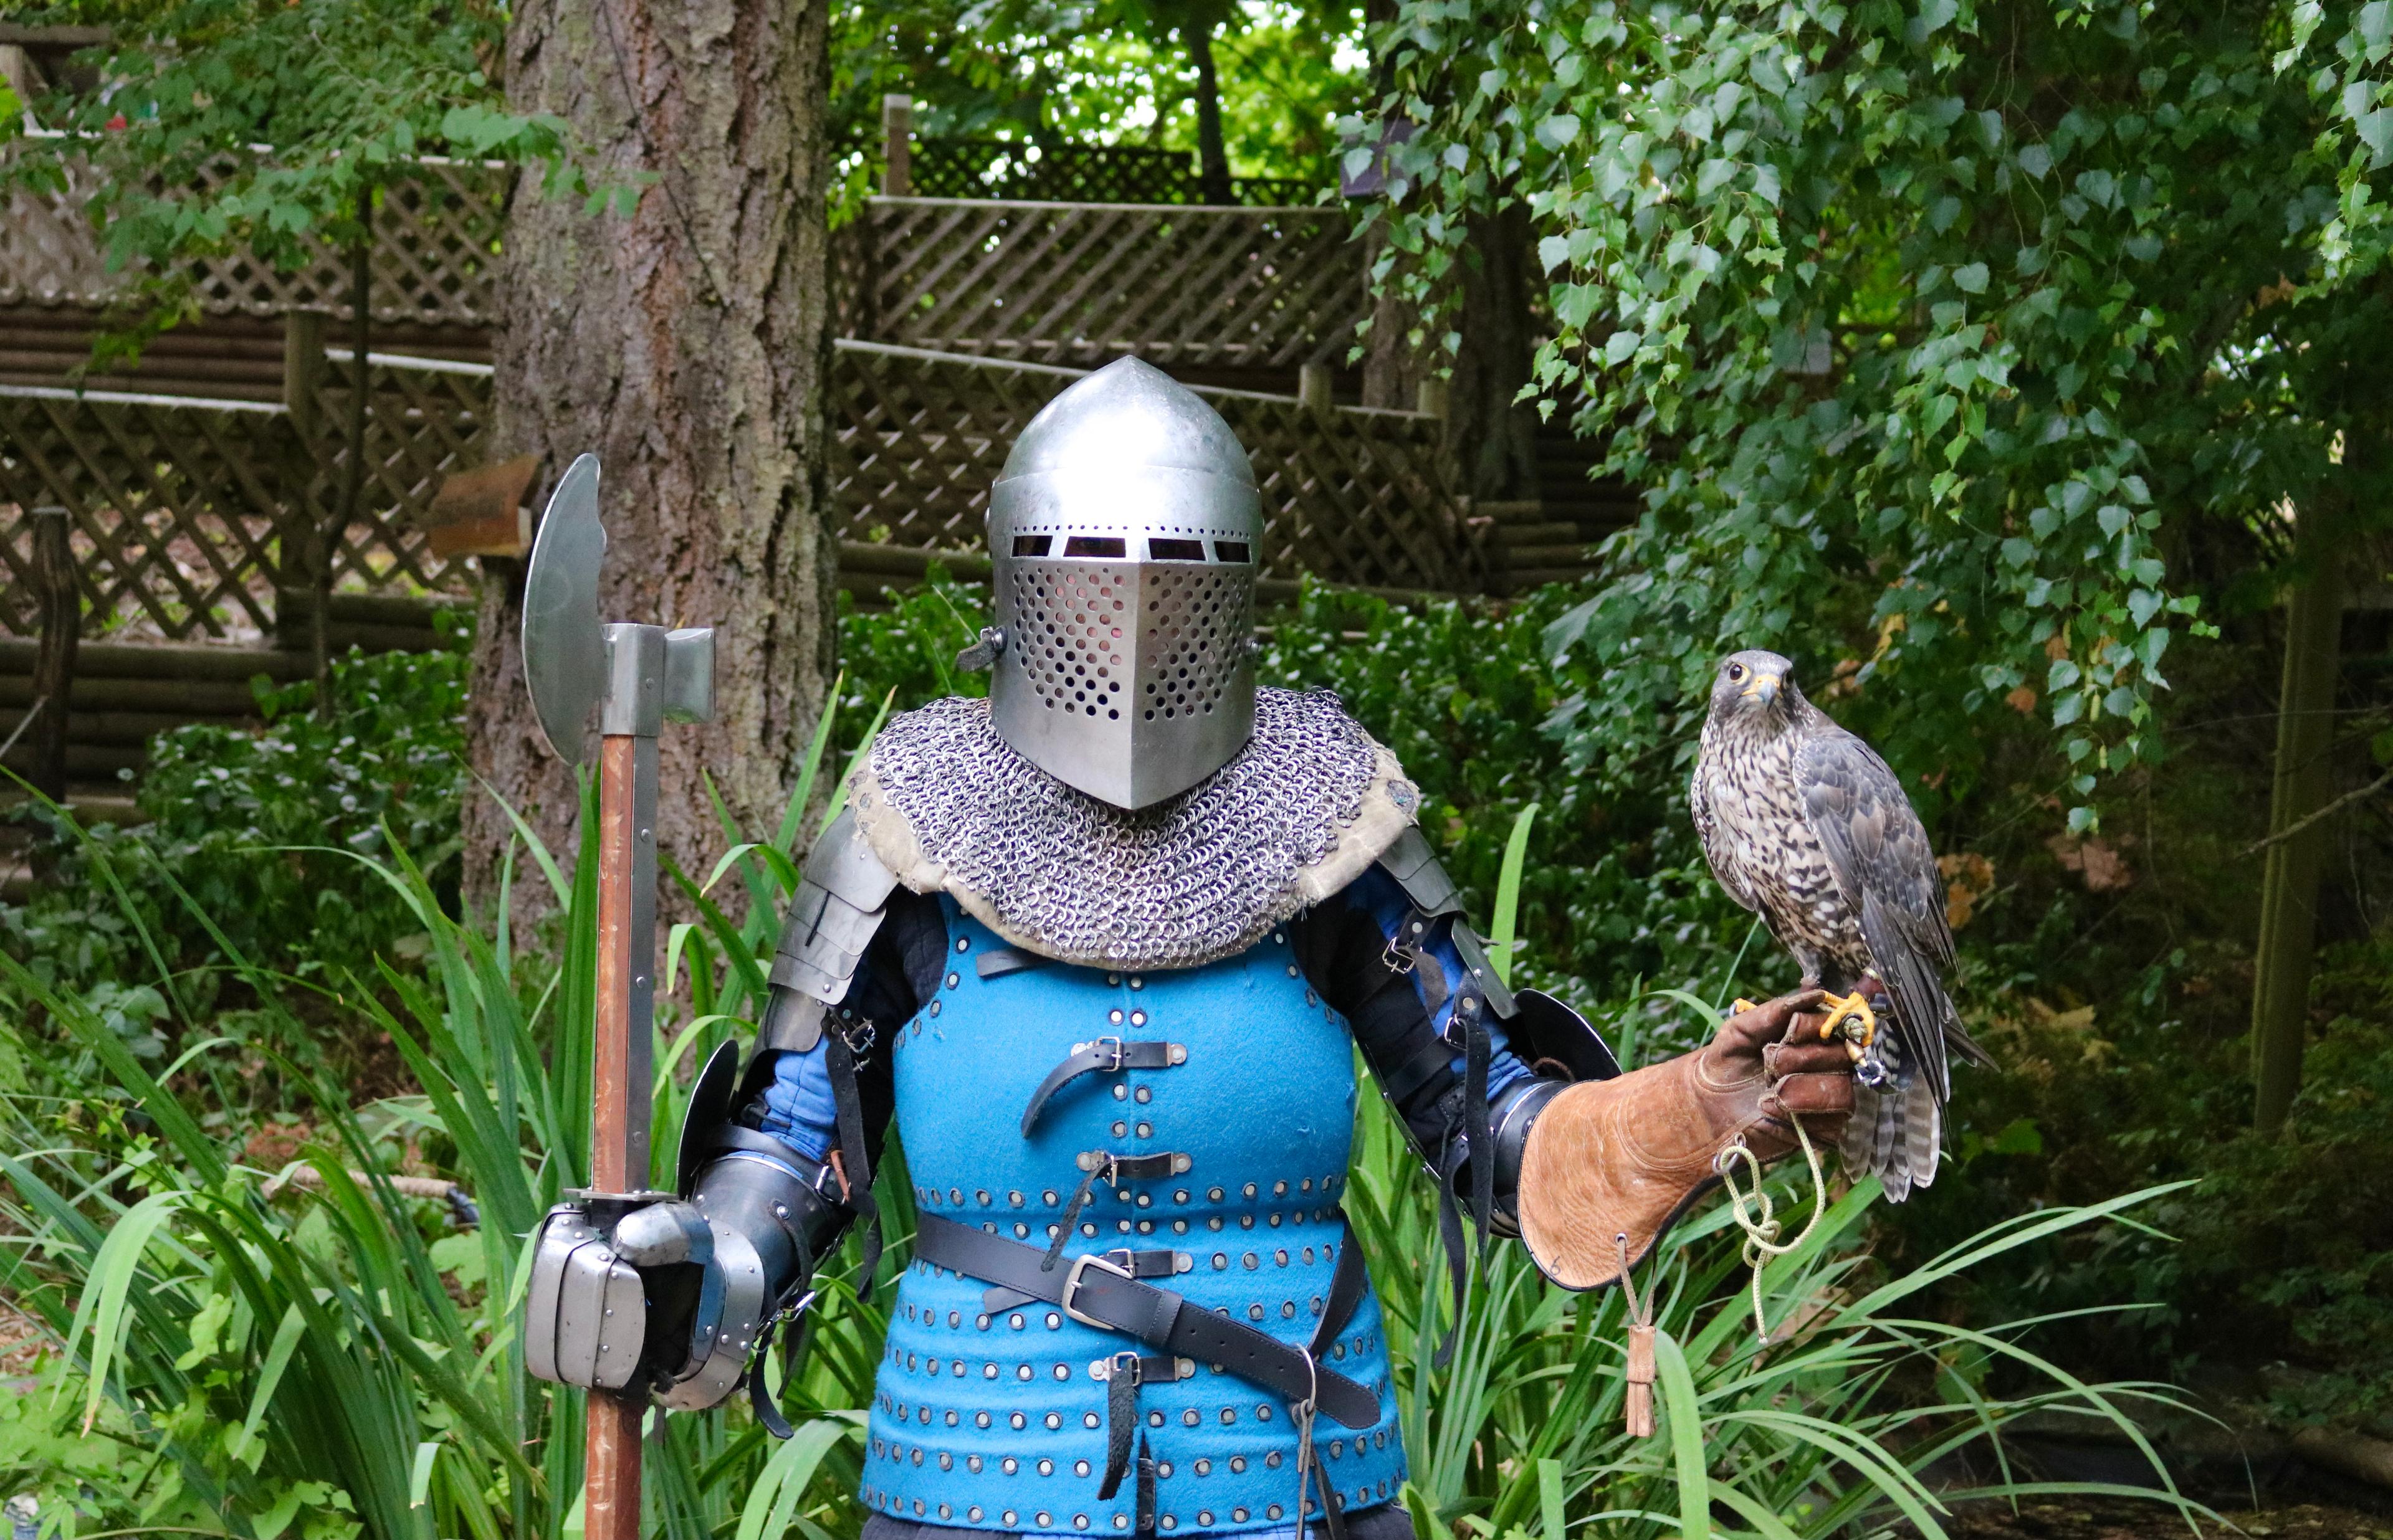 A woman in armor stands with a falcon on her wrist